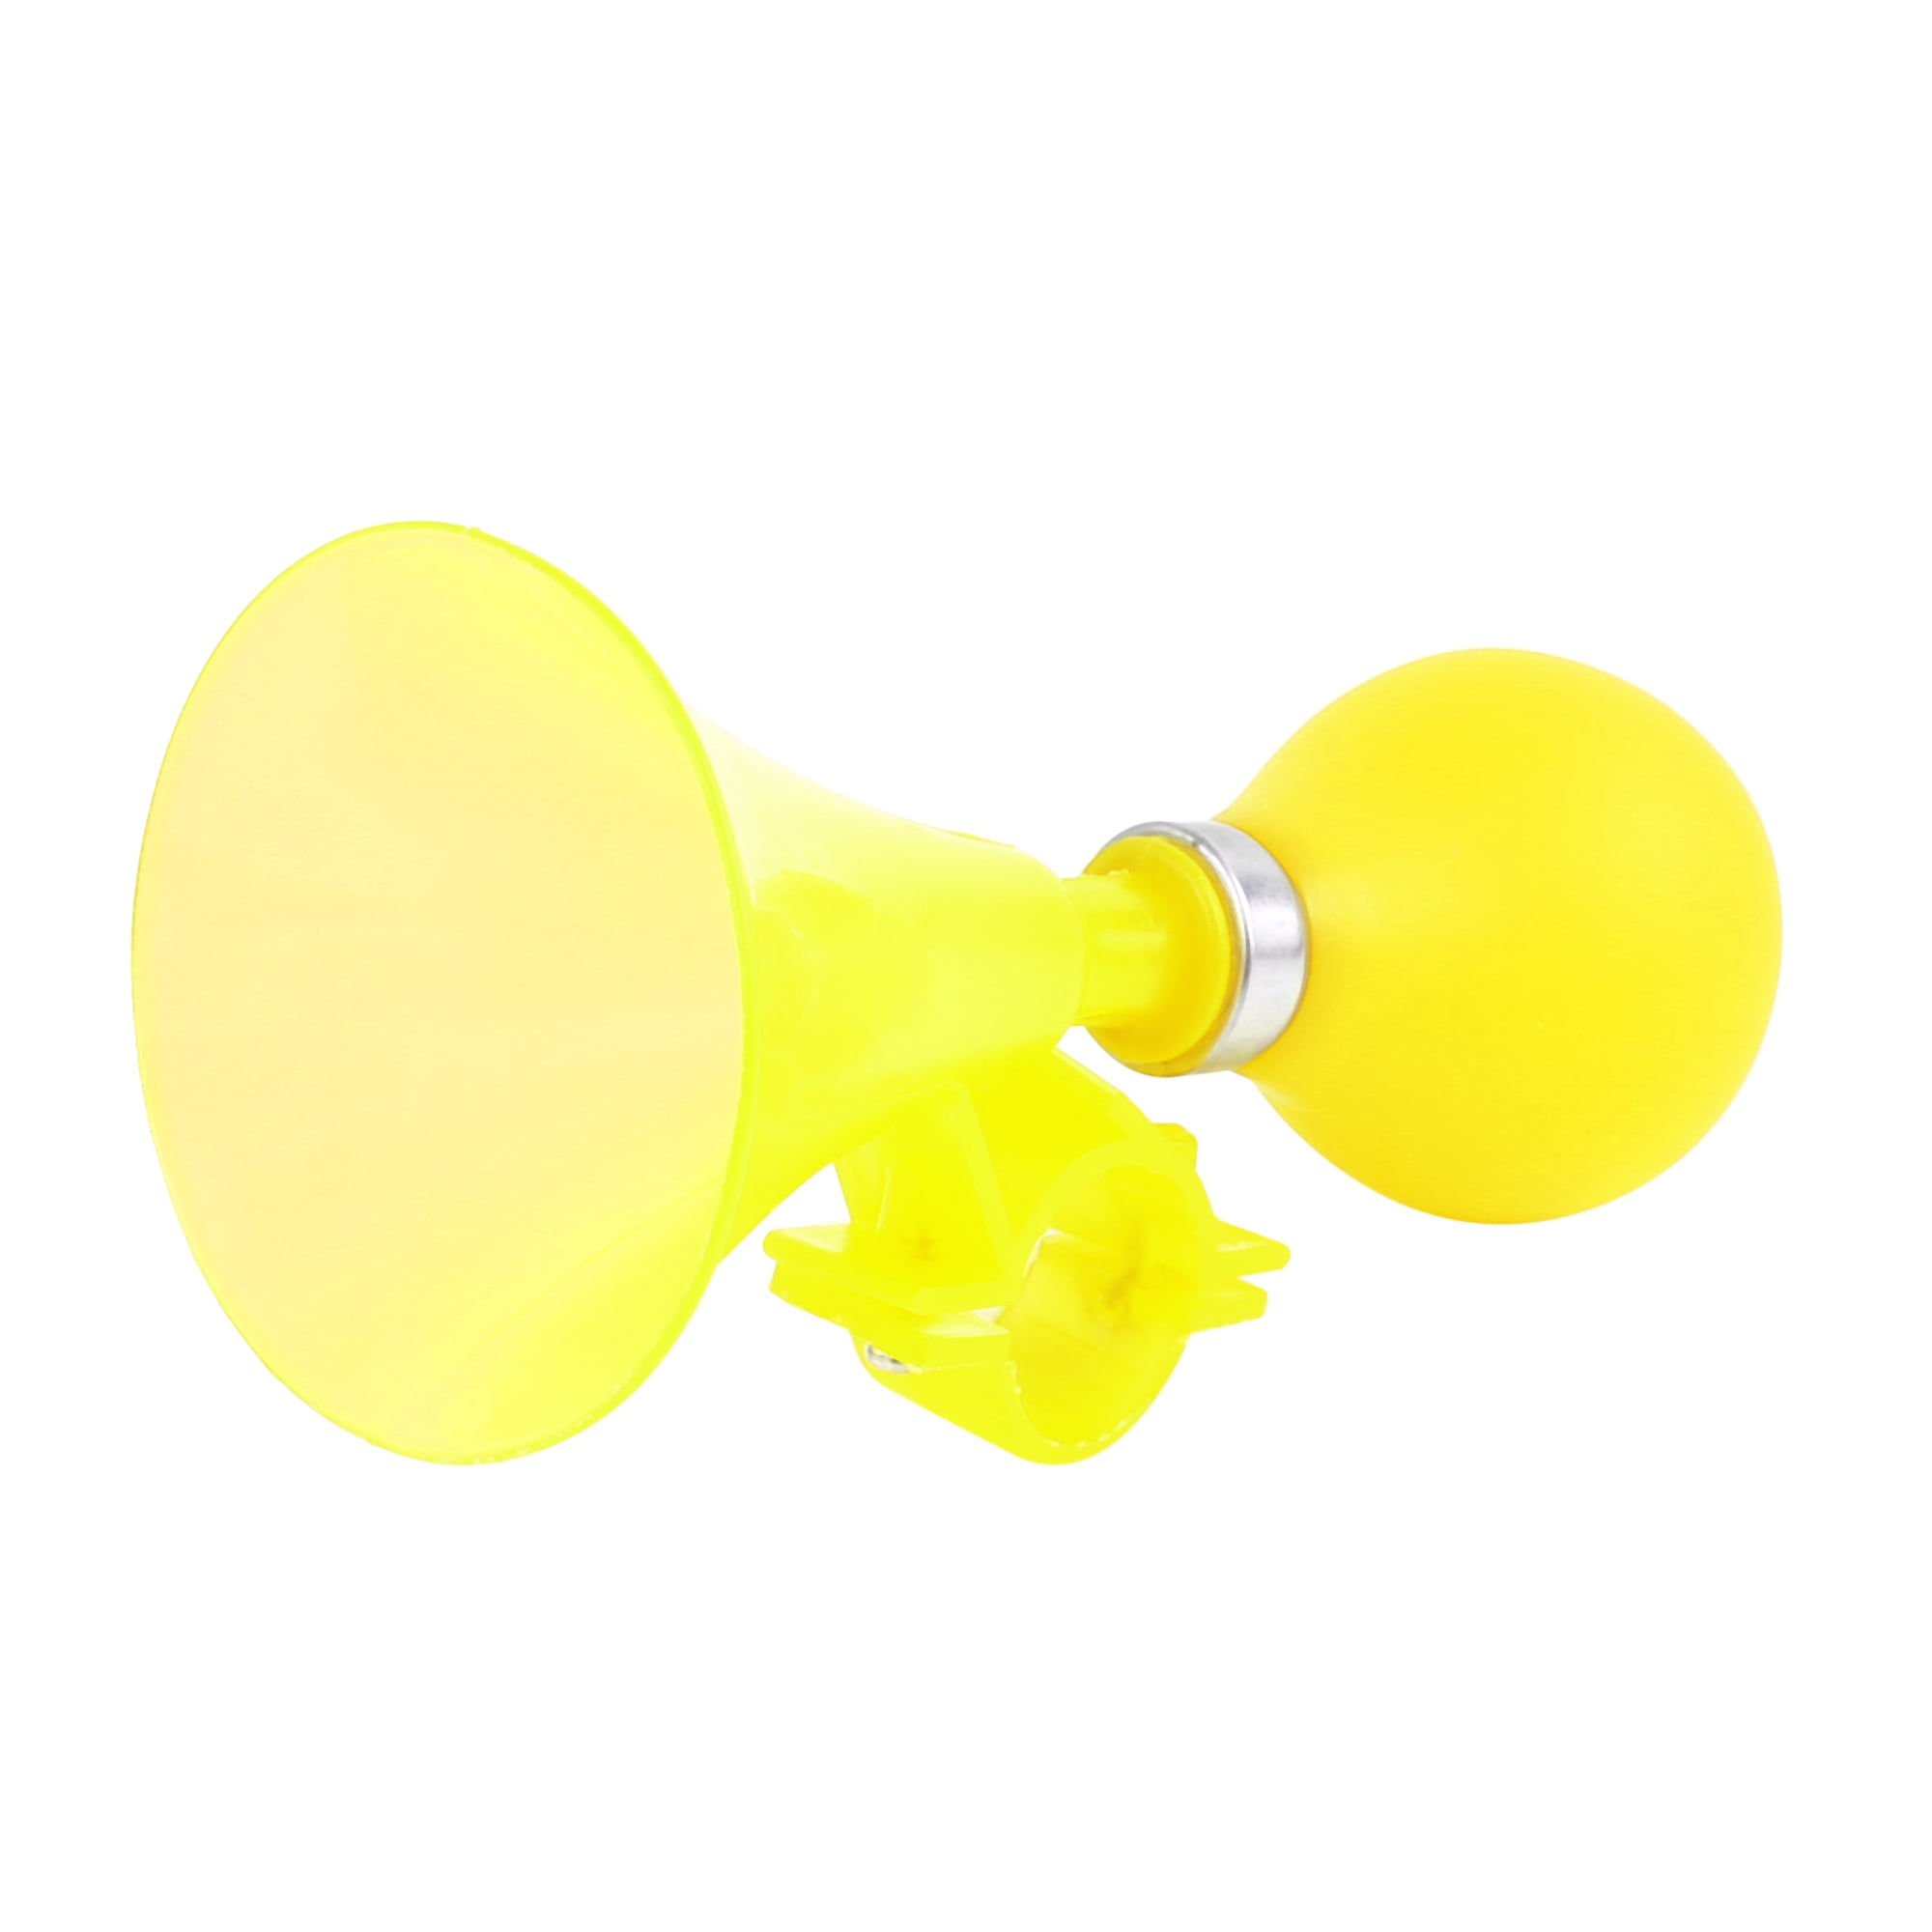 Bicycle Bell Cycling Air Horn Bike Alarm Yellow Bugle Trumpet ...